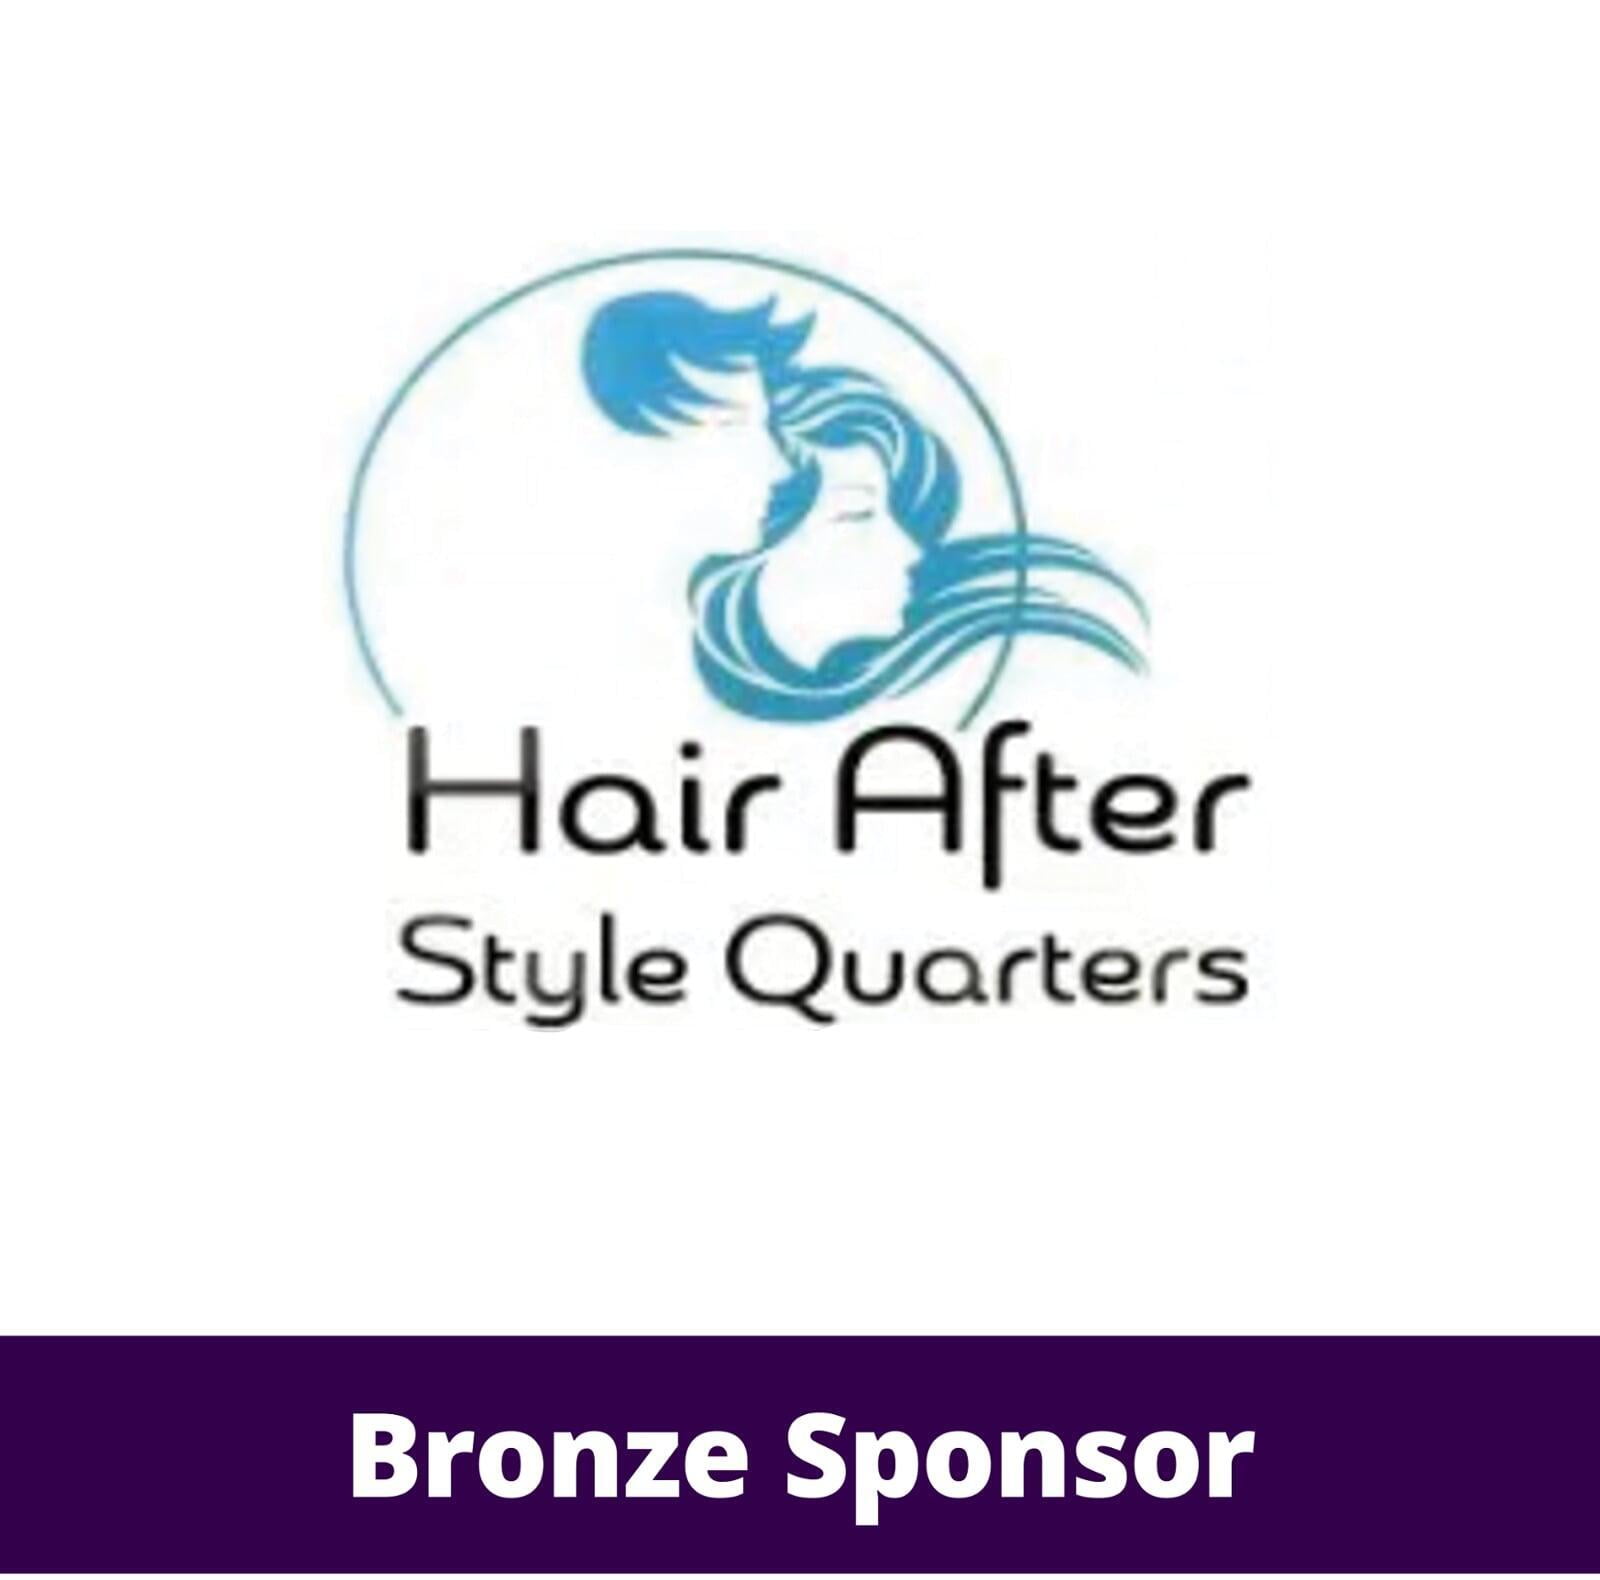 Hair After Style Quarters logo